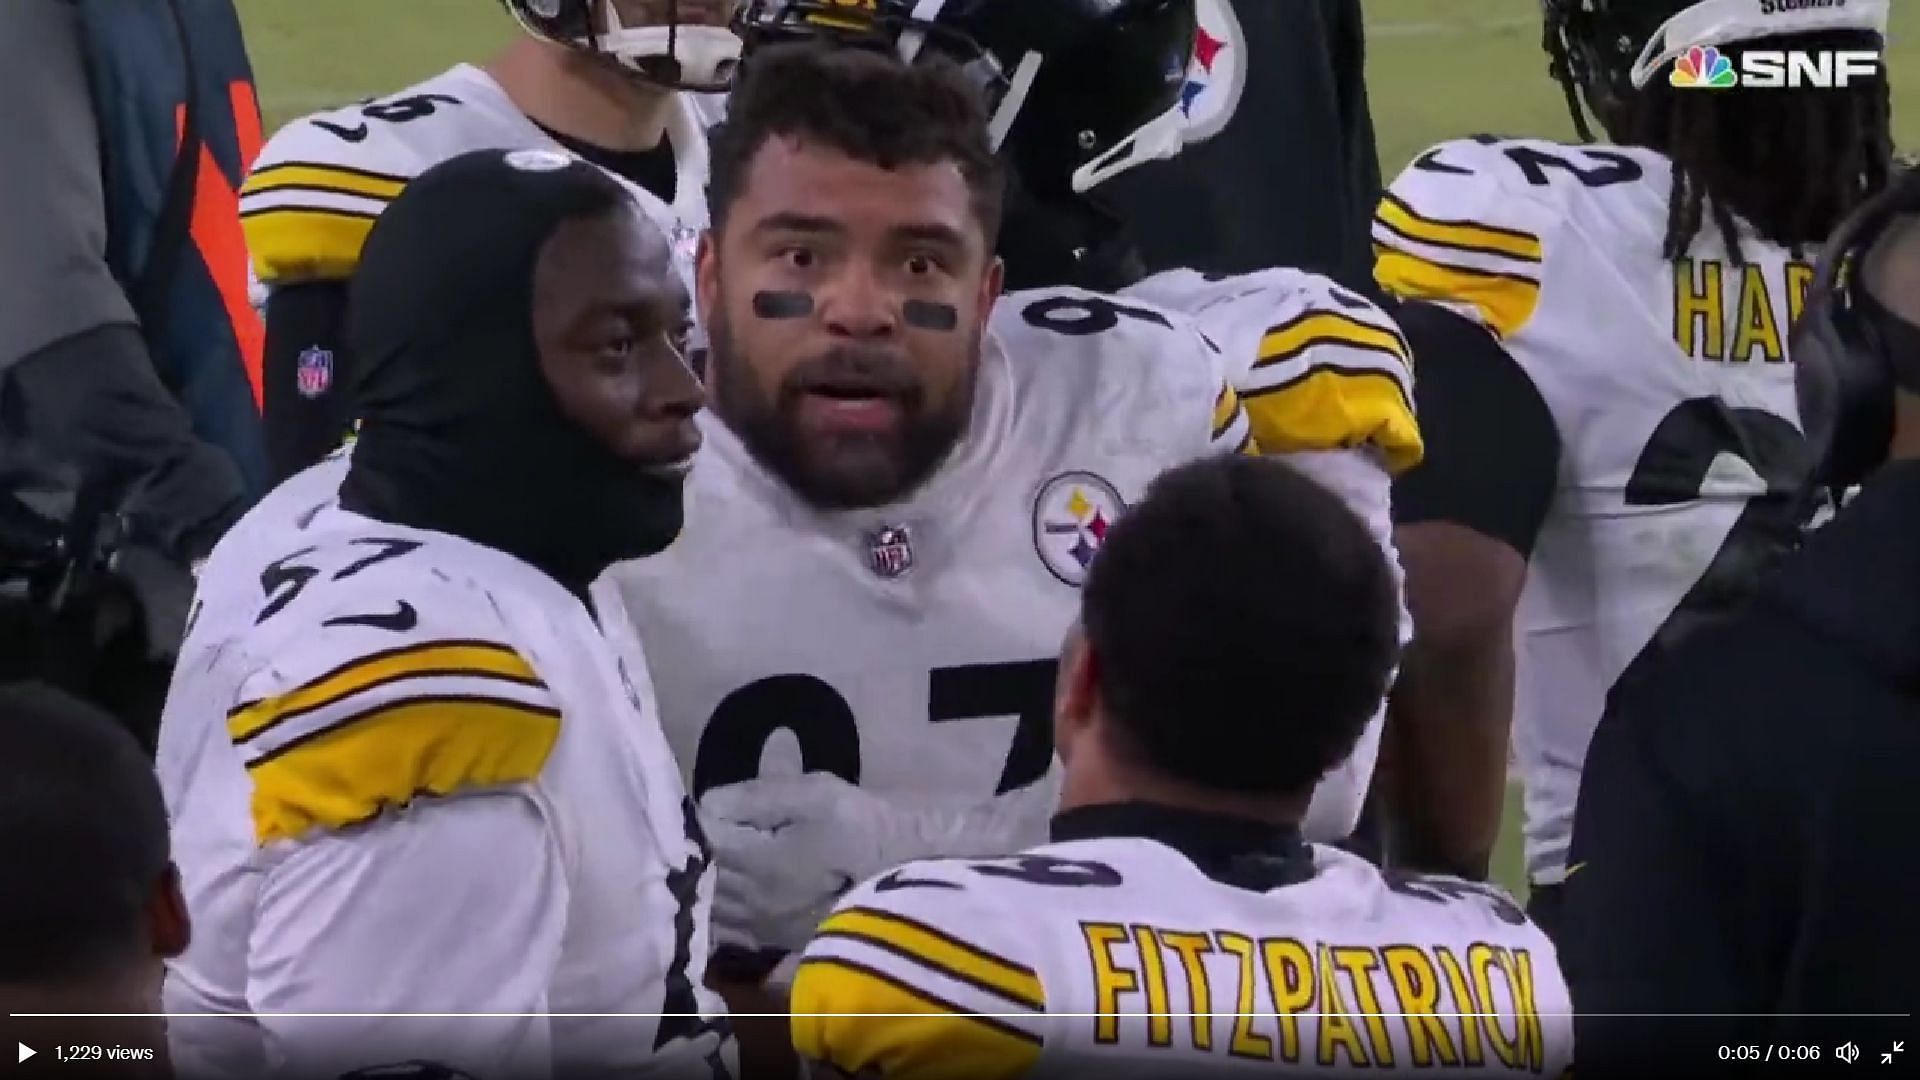 Cameron Heyward and Minkah Fitzpatrick get into an argument